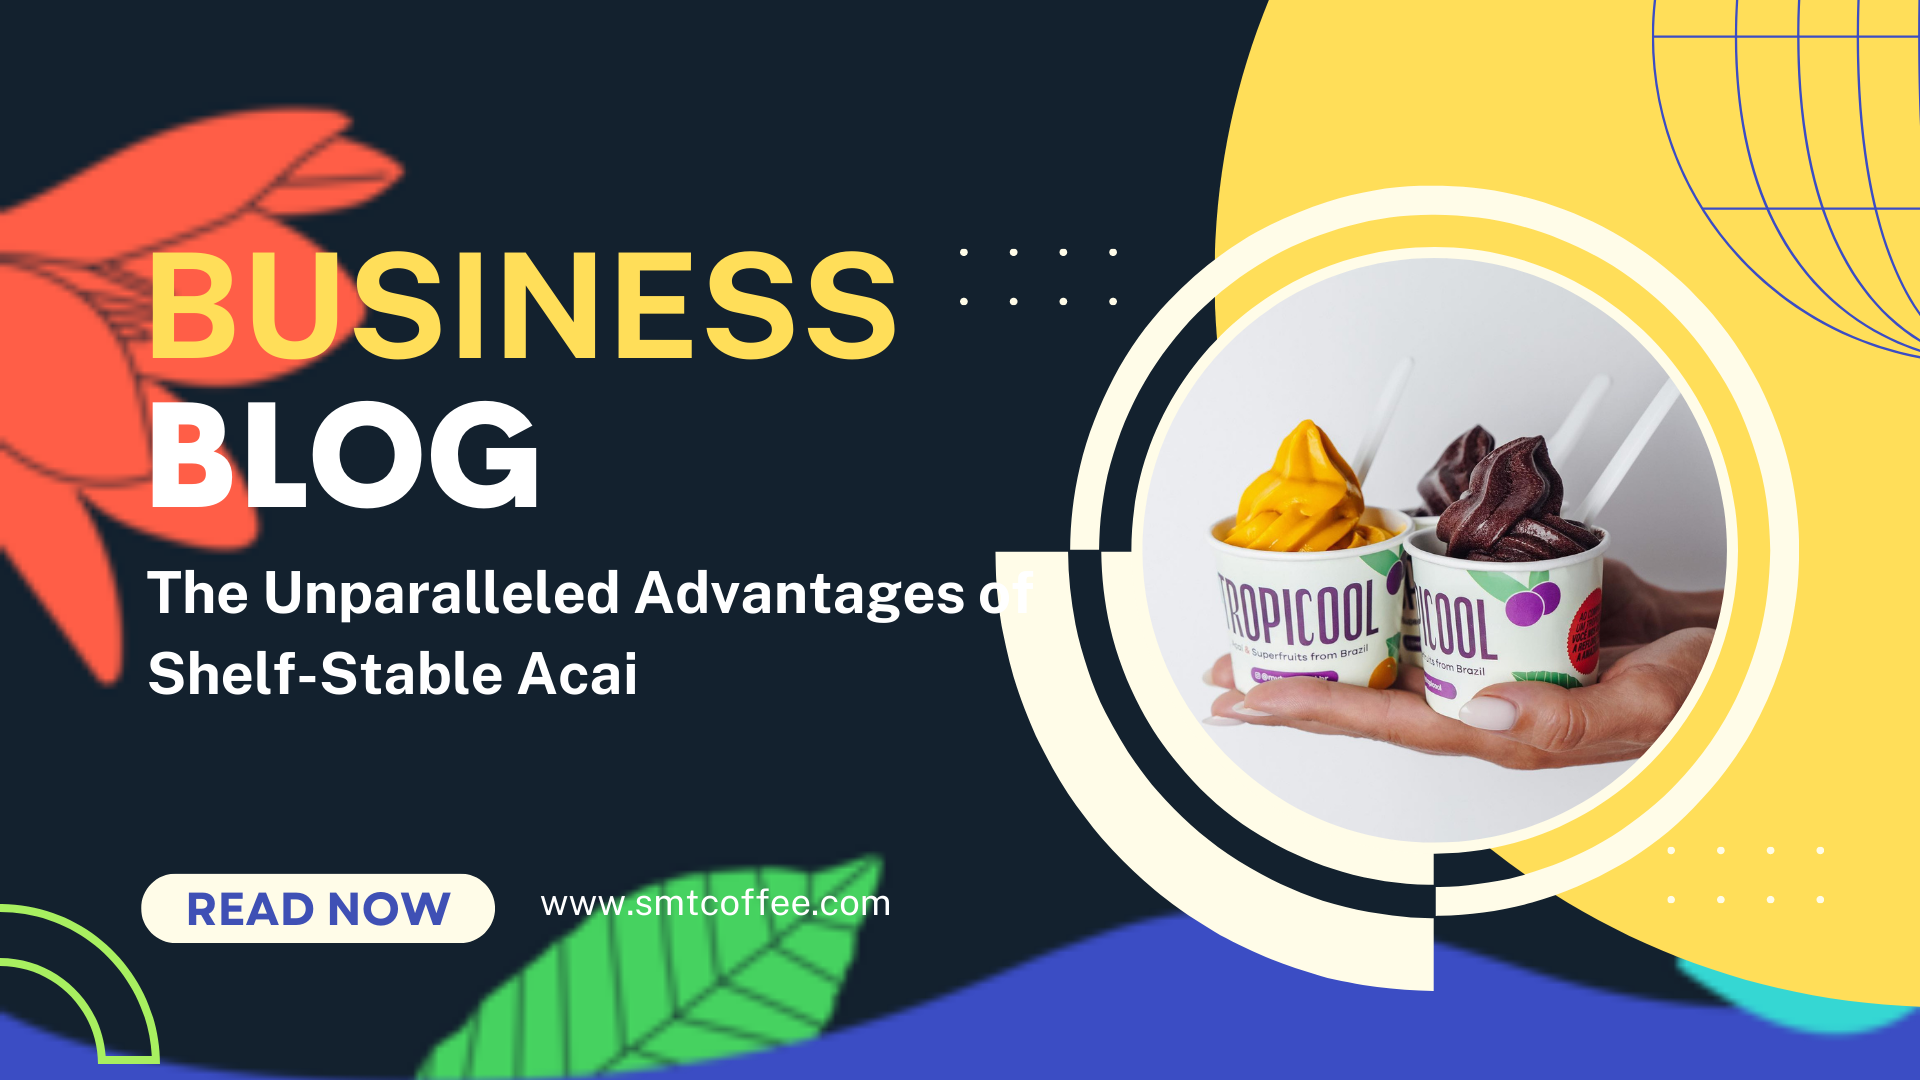 The Unparalleled Advantages of Shelf-Stable Acai